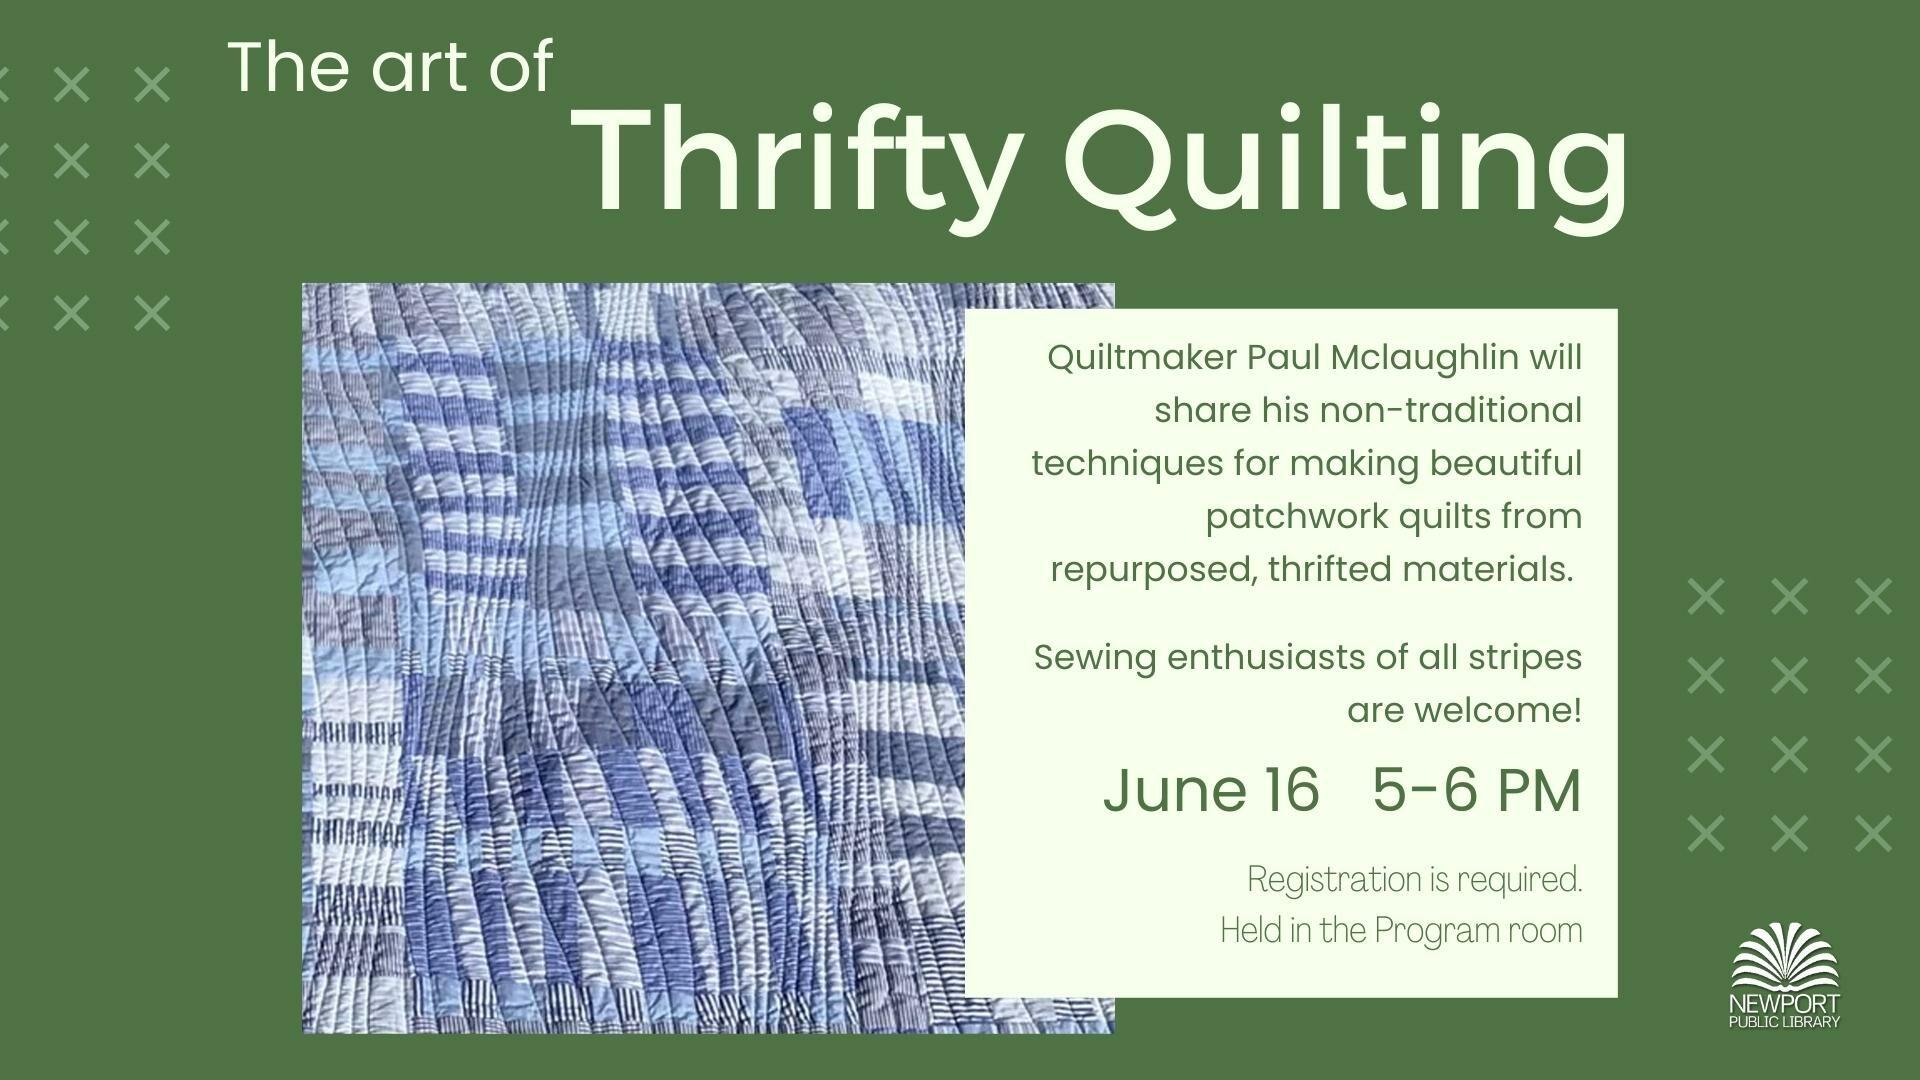 The Art of Thrifty Quilting